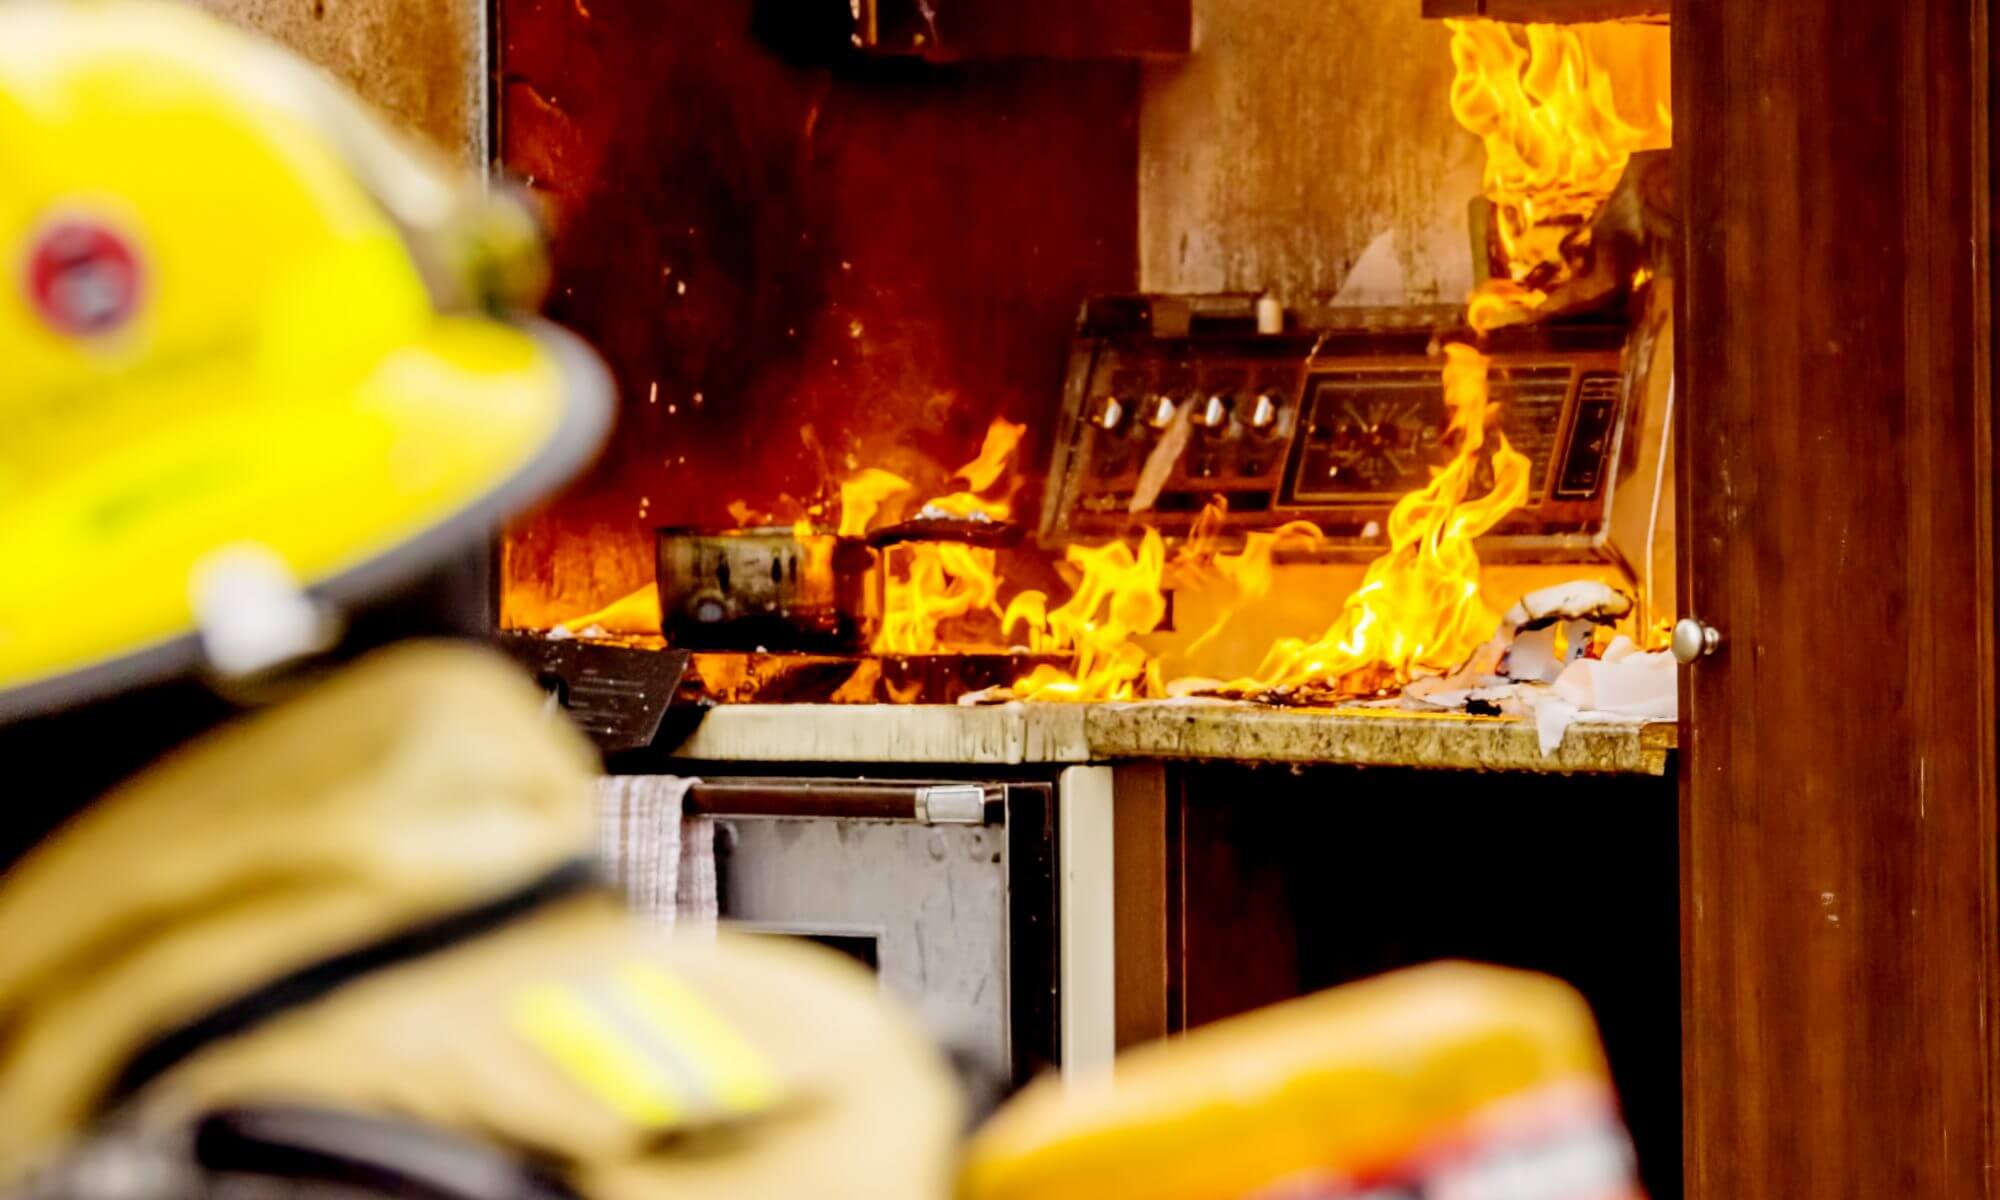 12 tips to prevent kitchen fires